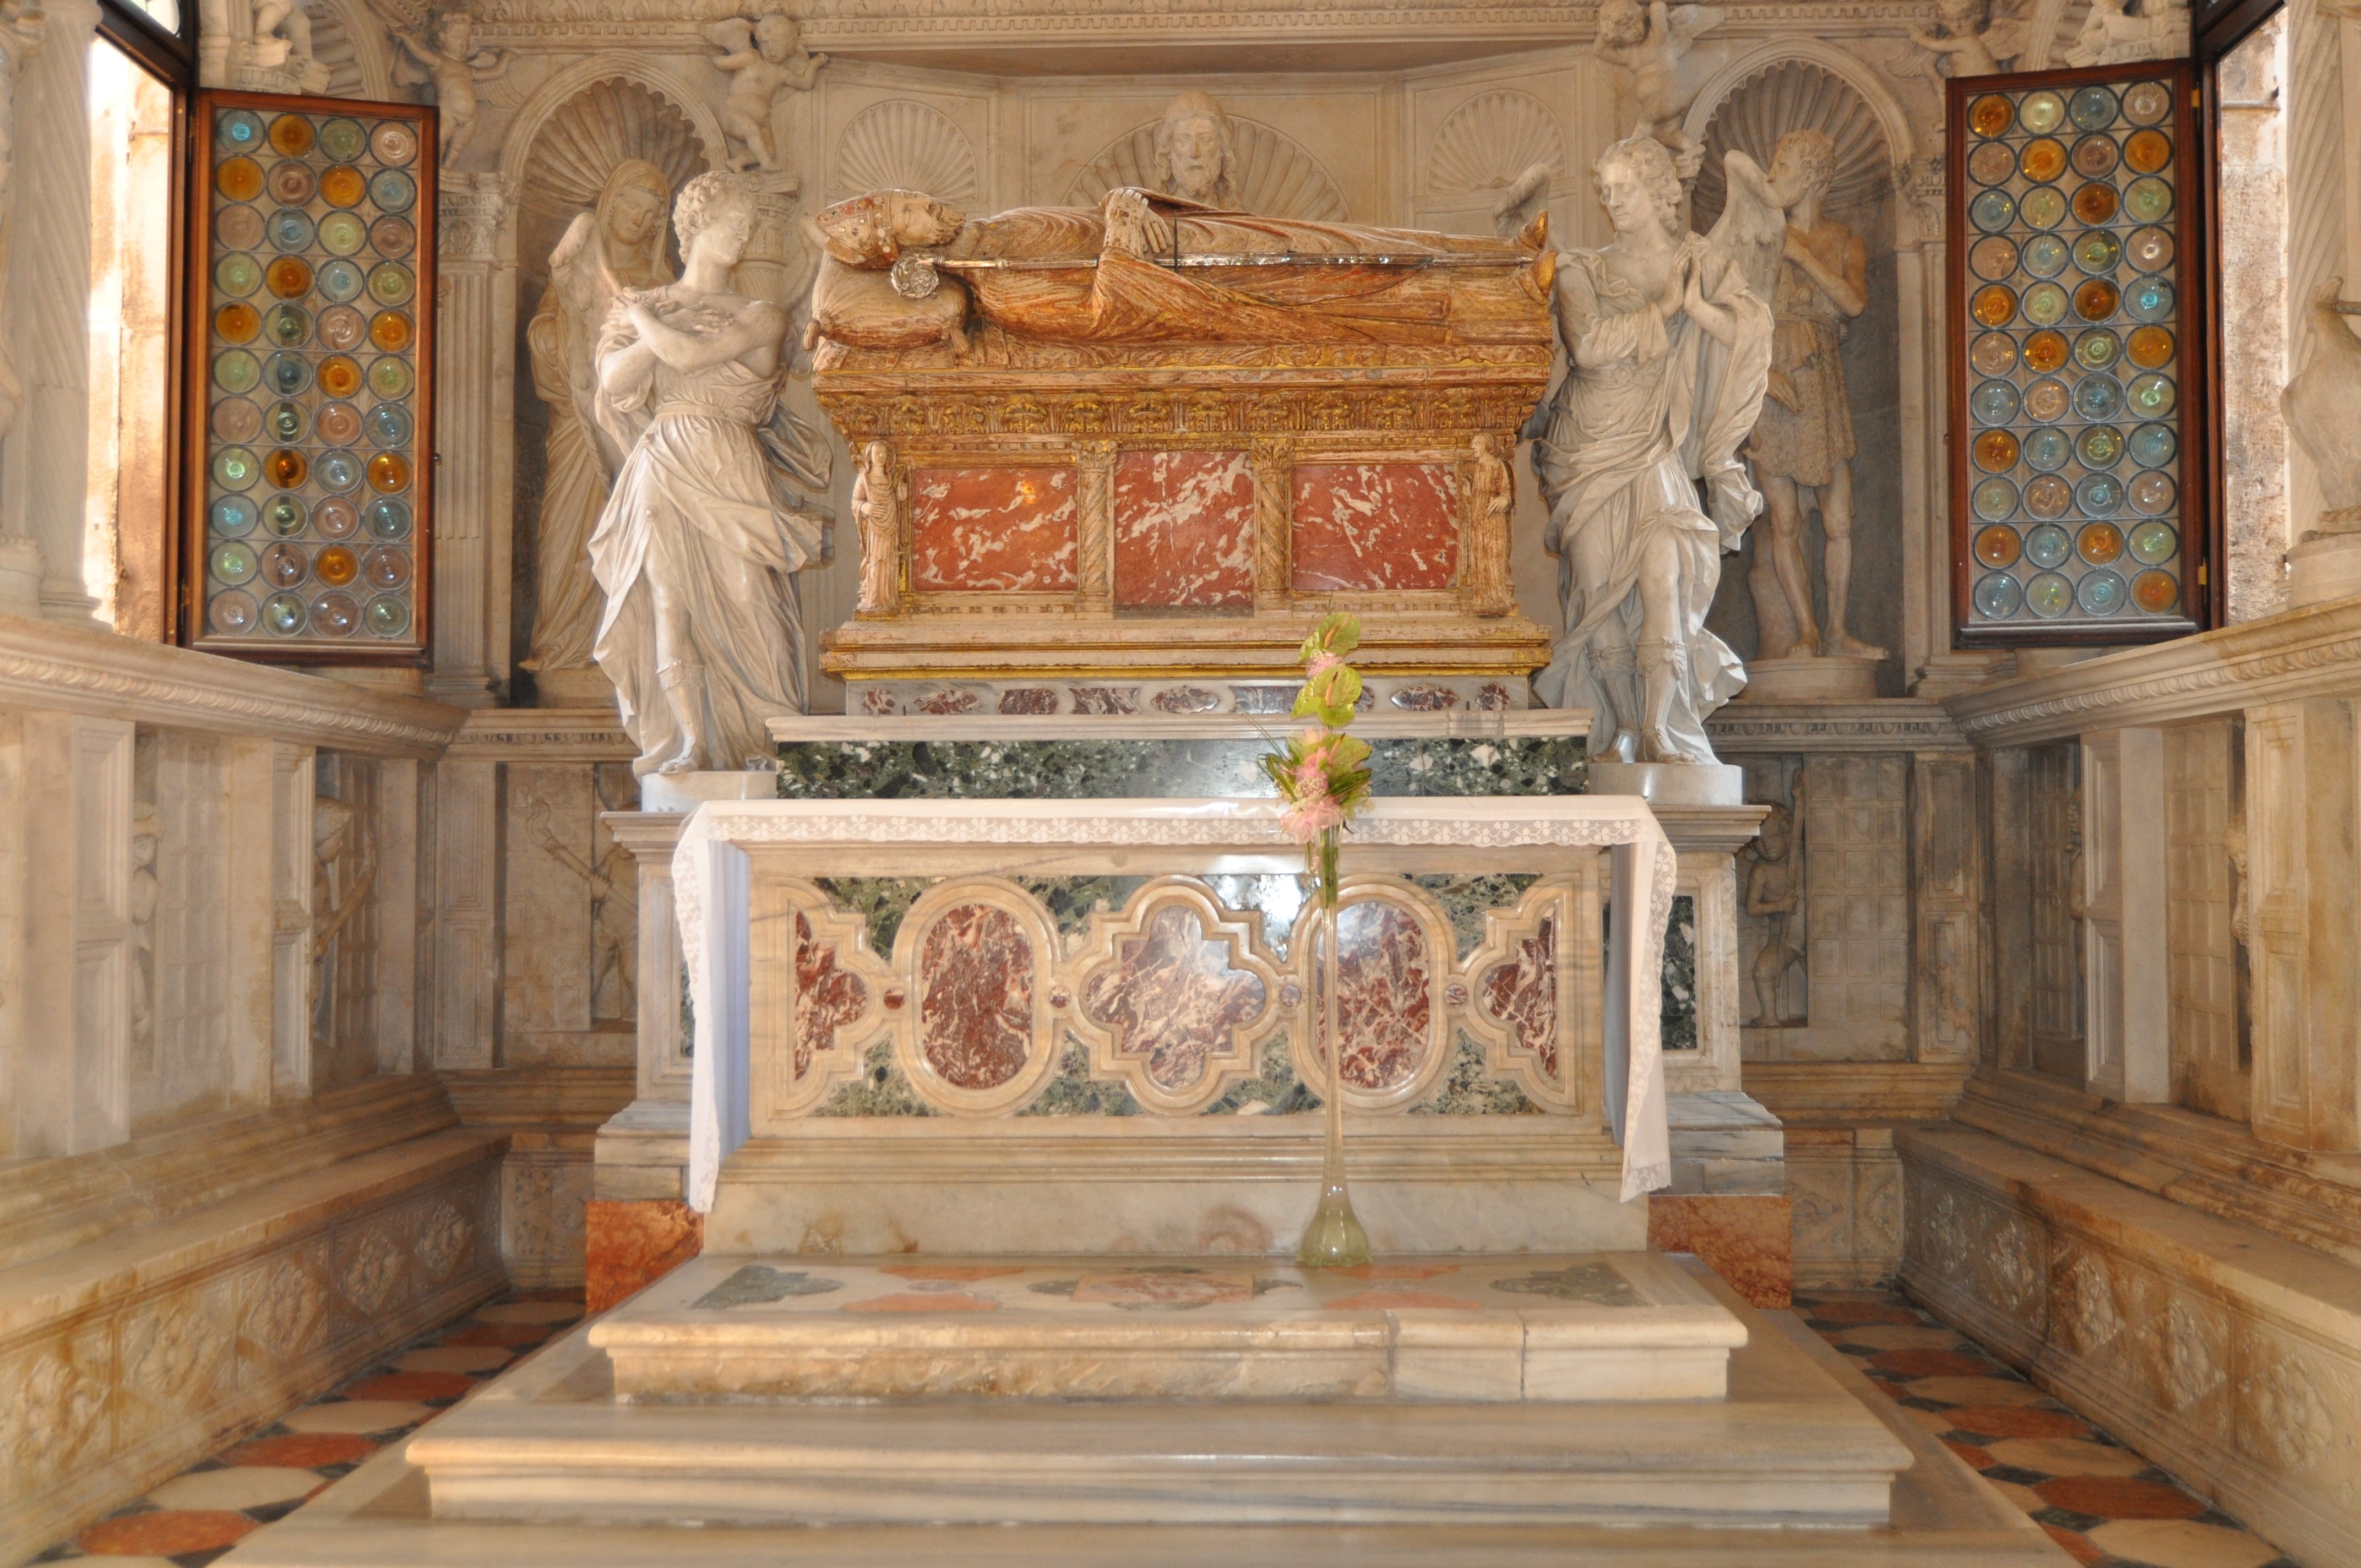 marble altar and 2 angels statues